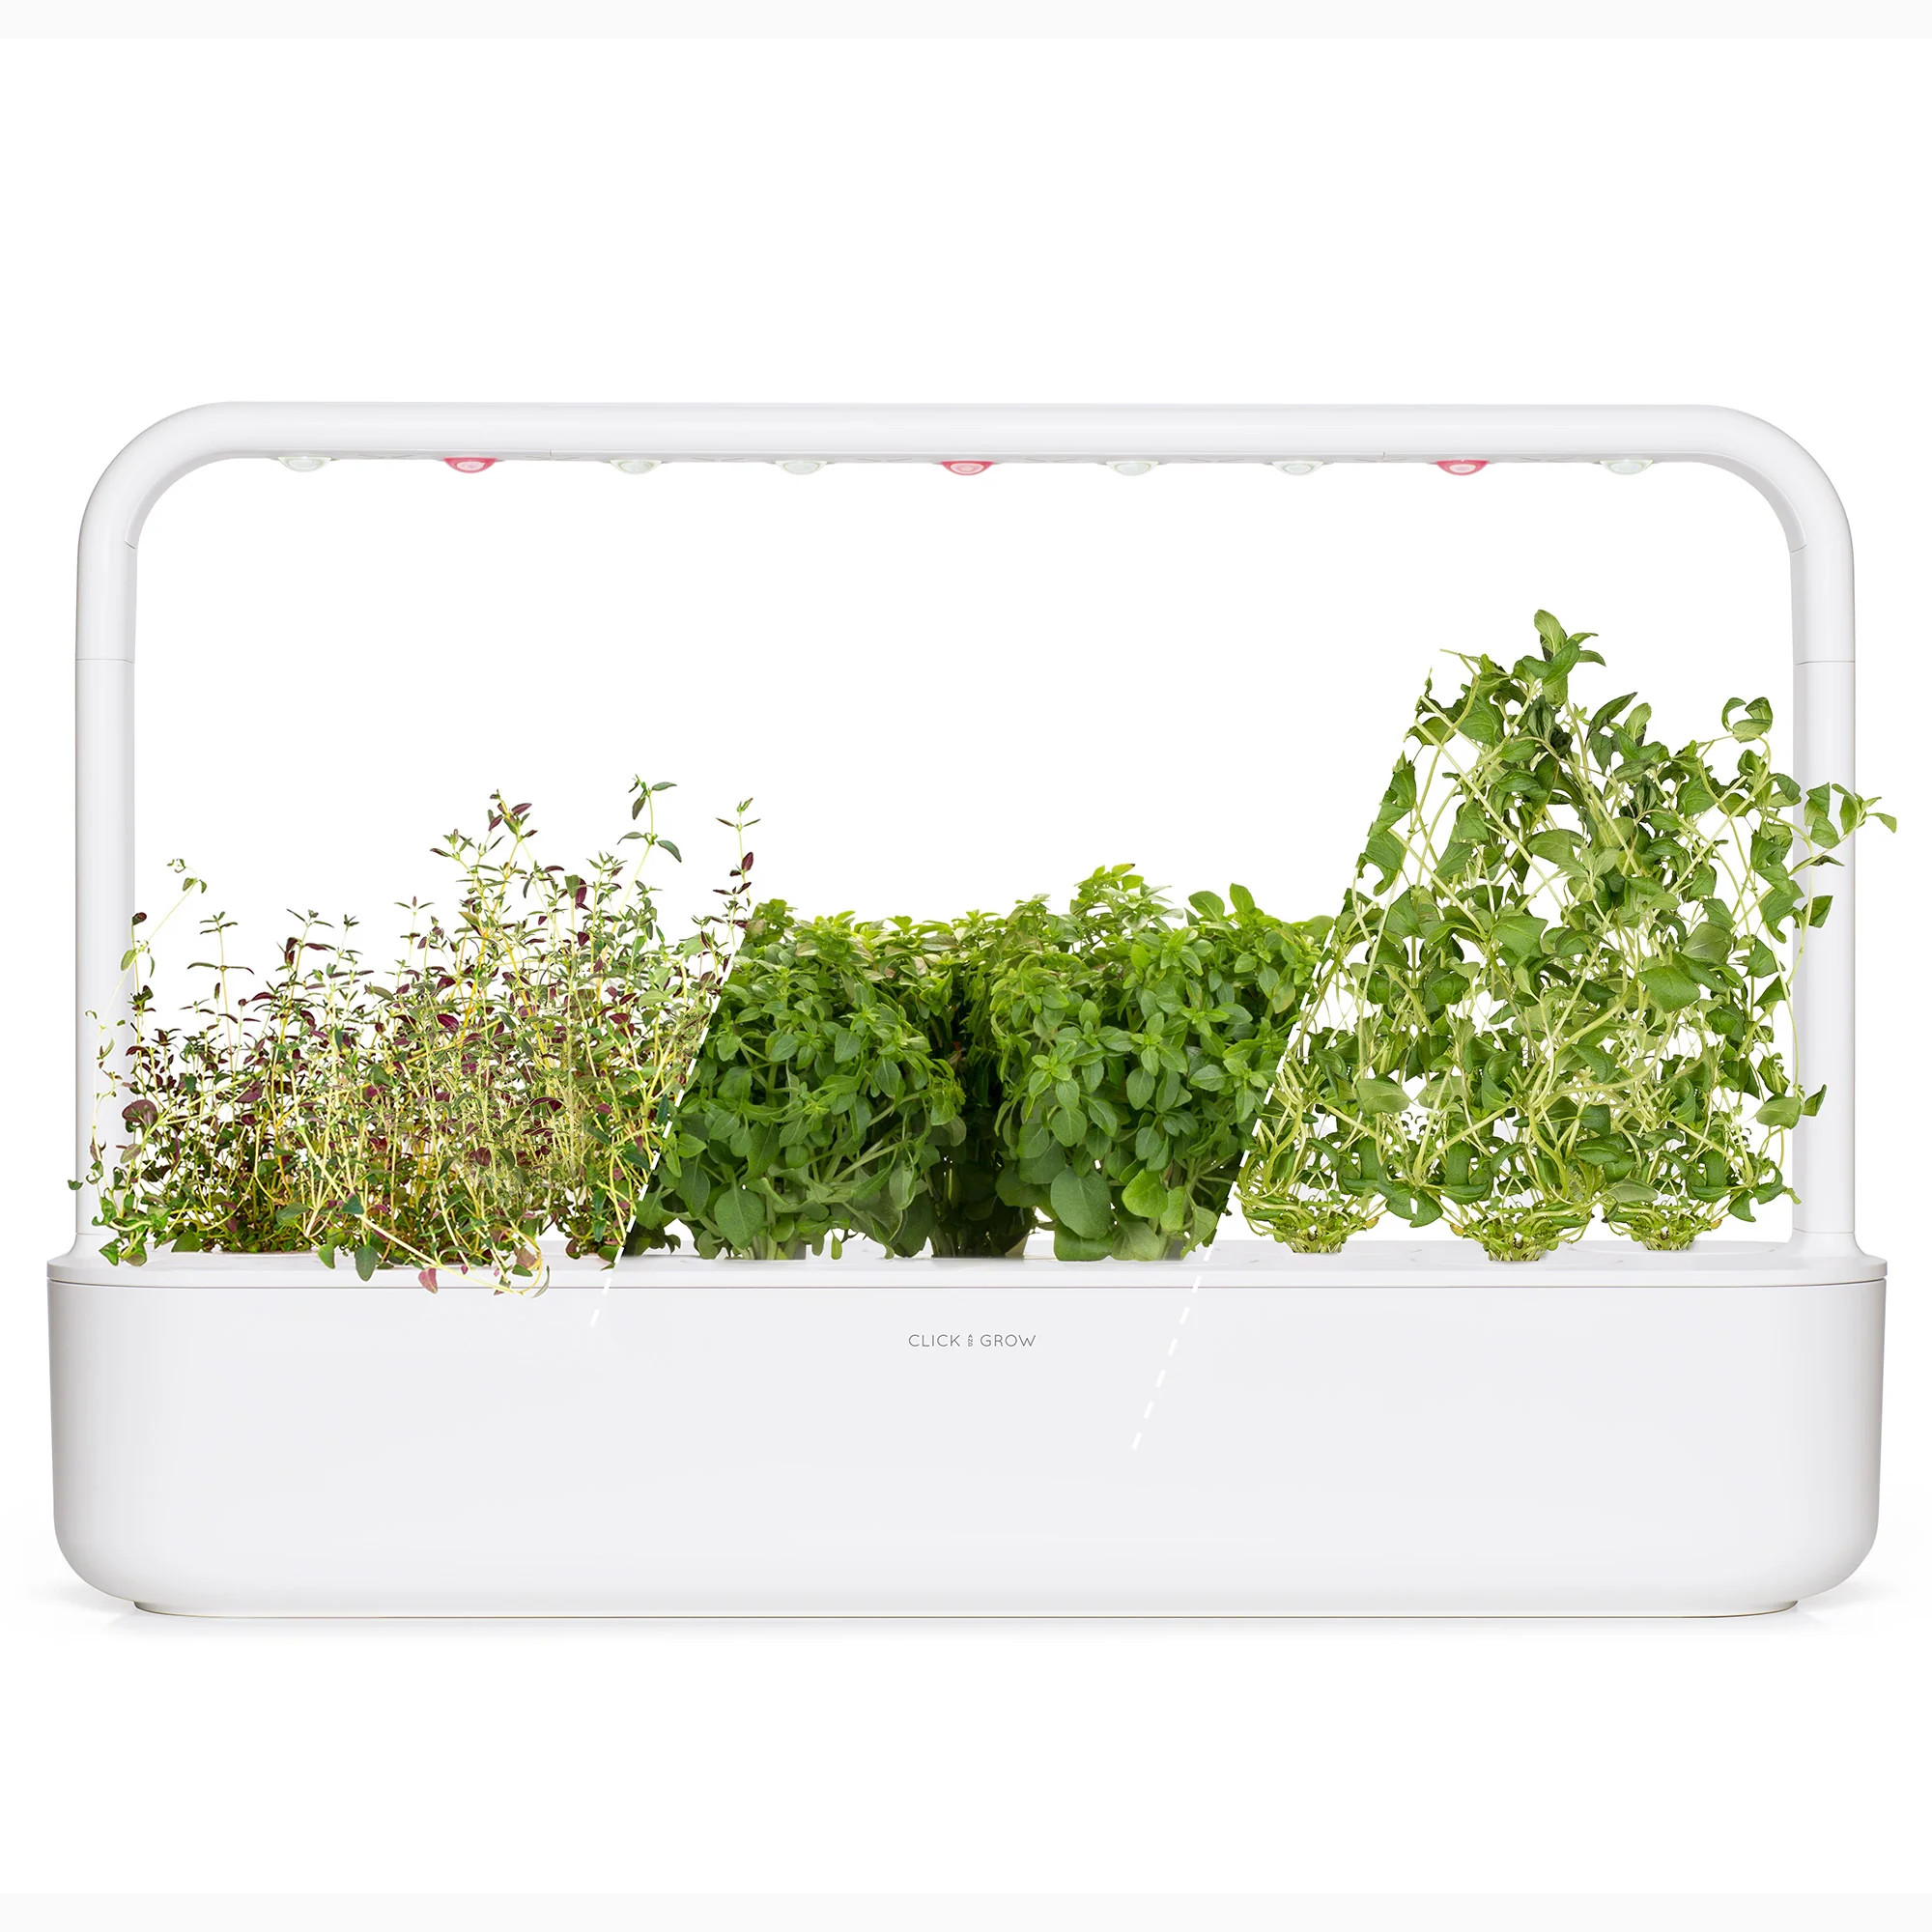 Click & Grow -  Smart Garden 9 with Italian Herb Kit with Grow Light and 36 Plant Pods